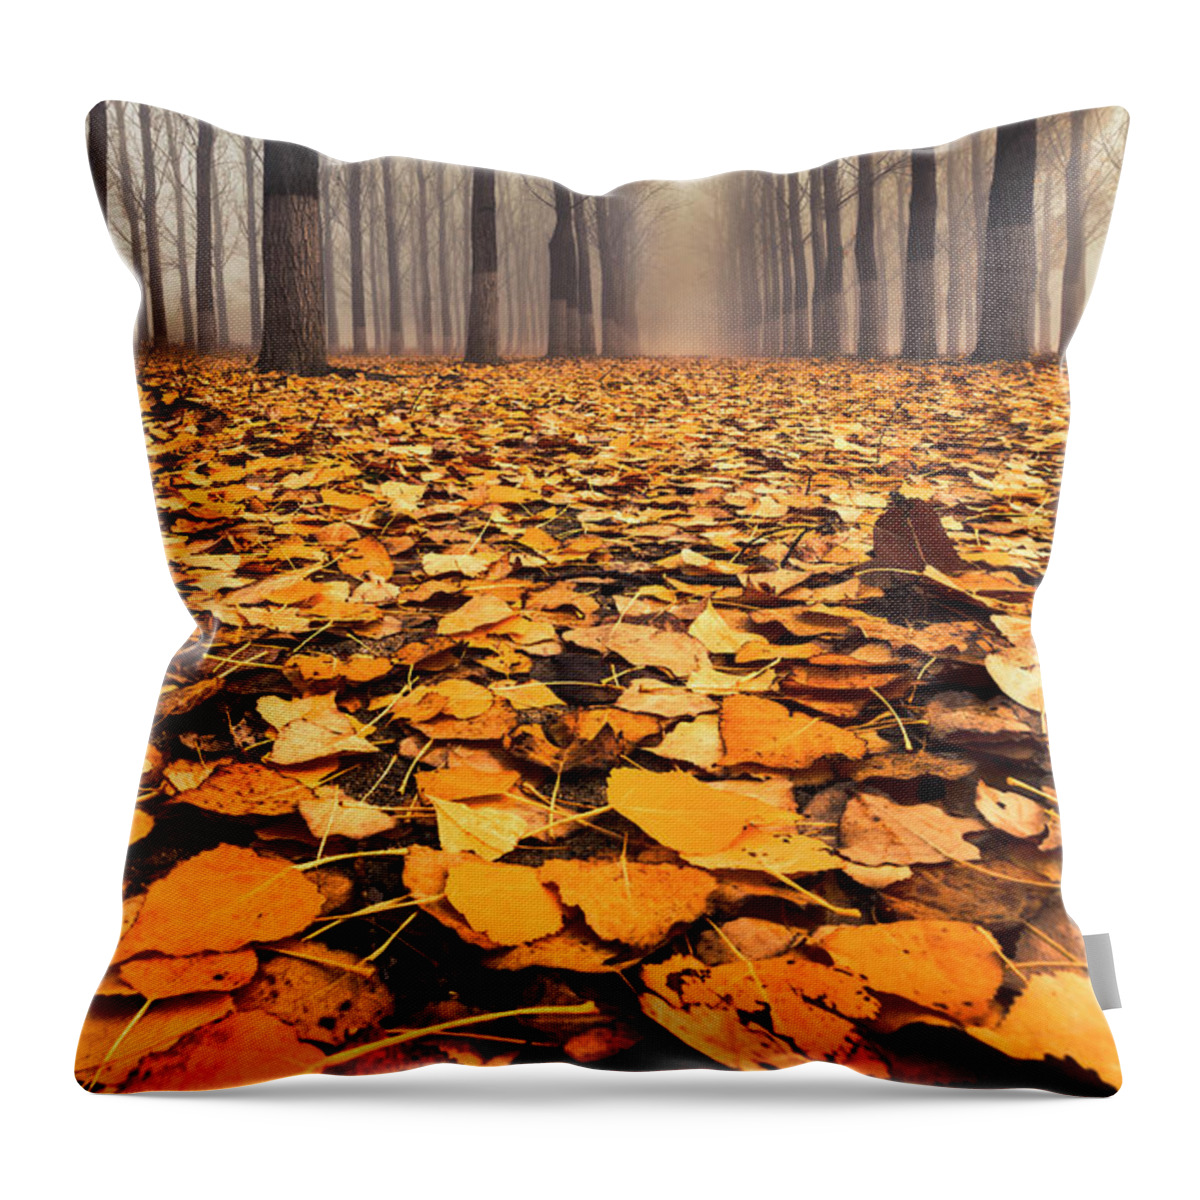 Bulgaria Throw Pillow featuring the photograph Yellow Carpet by Evgeni Dinev